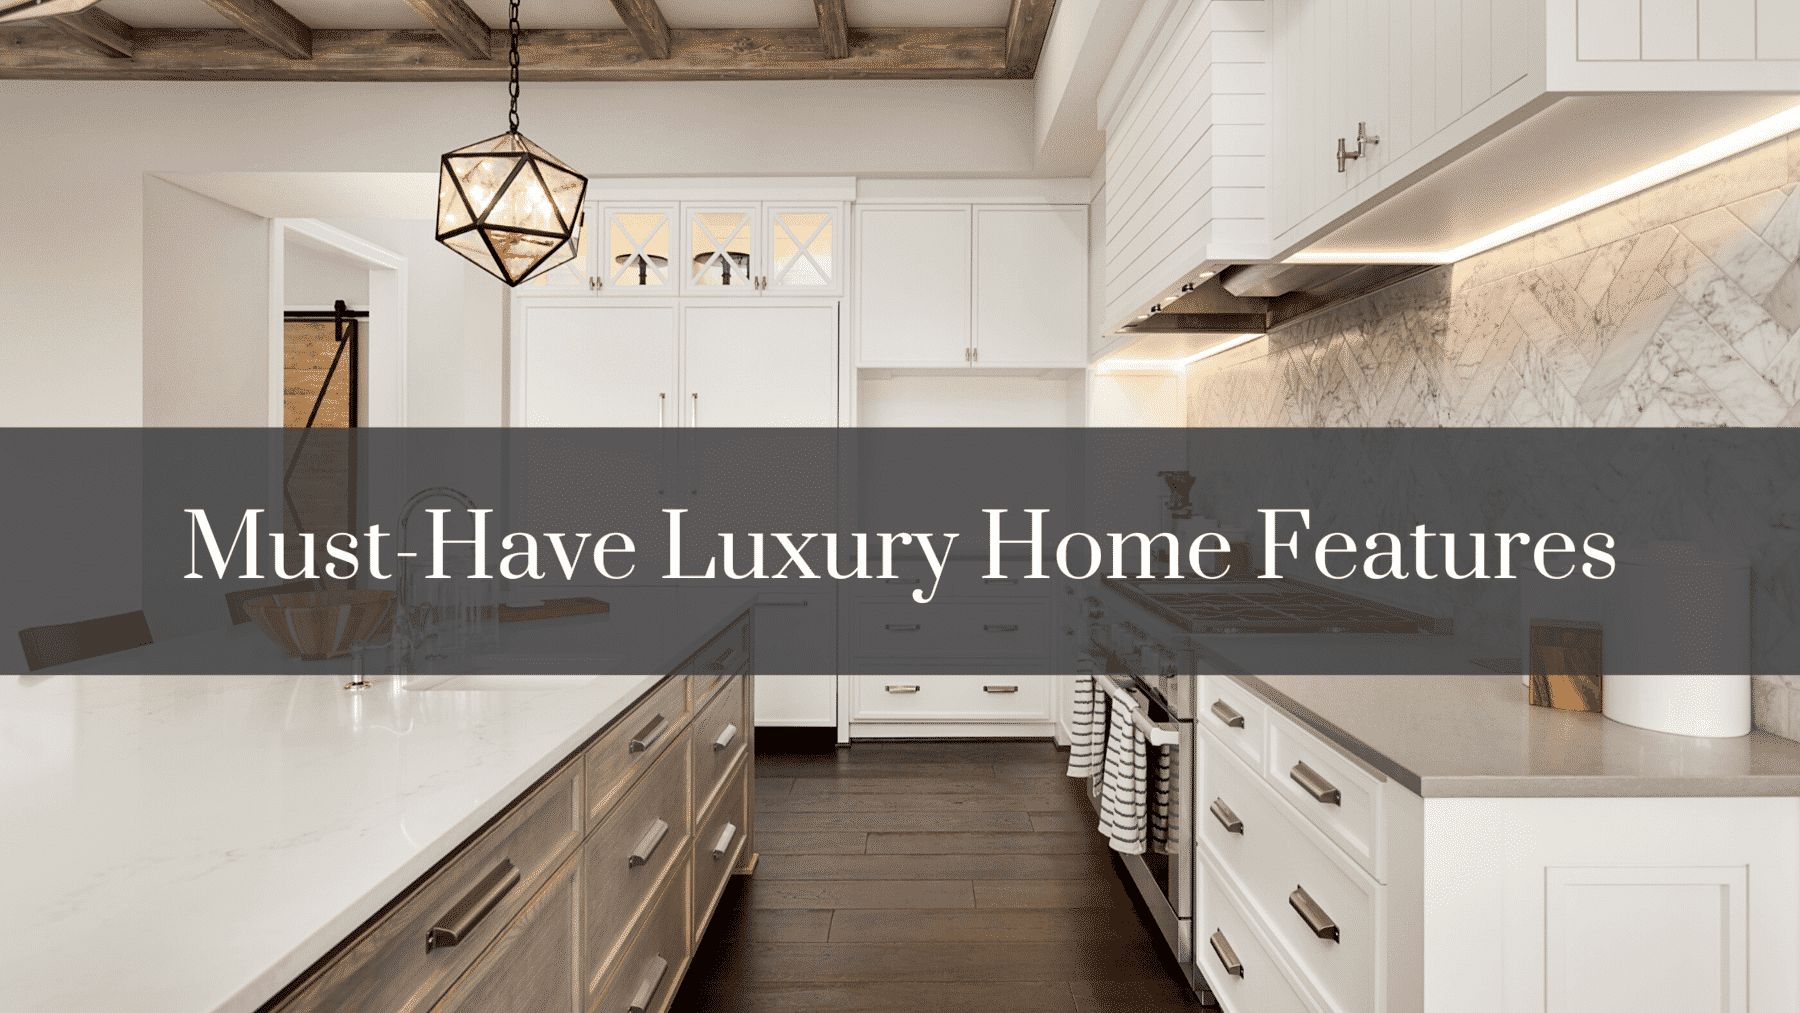 Must-Have Luxury Home Features in your Shoal Creek home